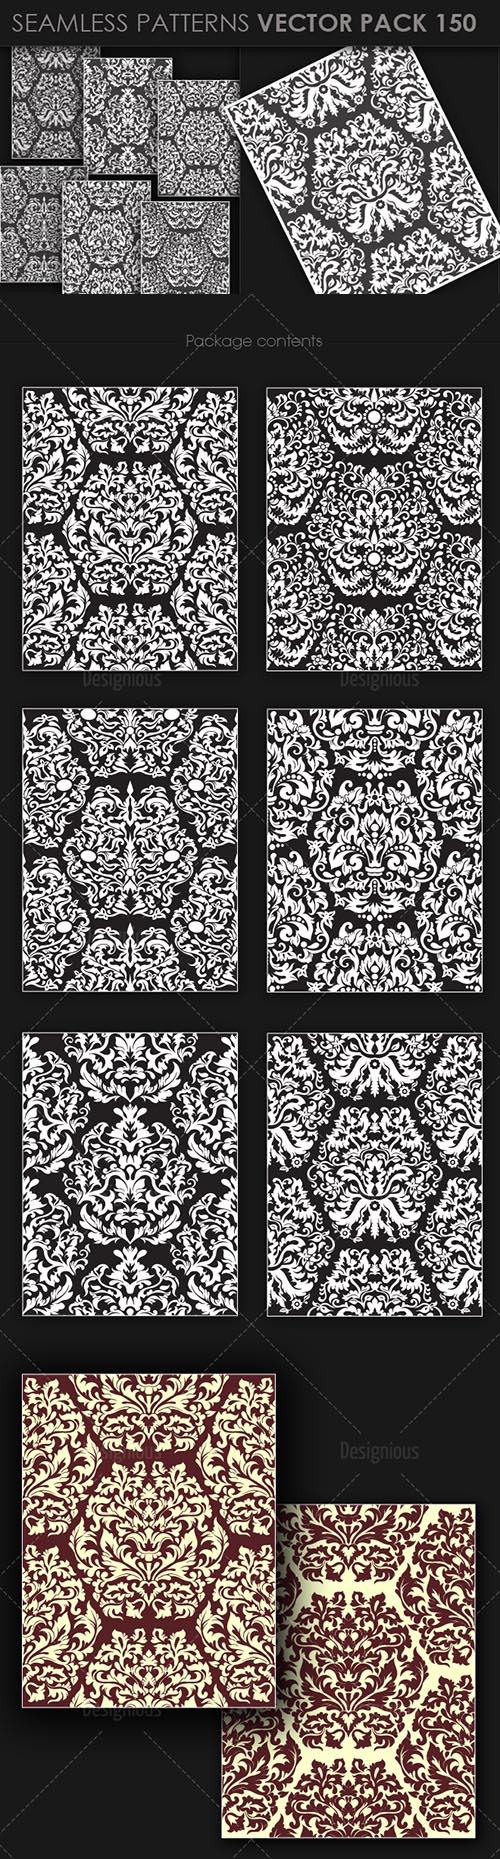 Seamless Patterns Vector Pack 150